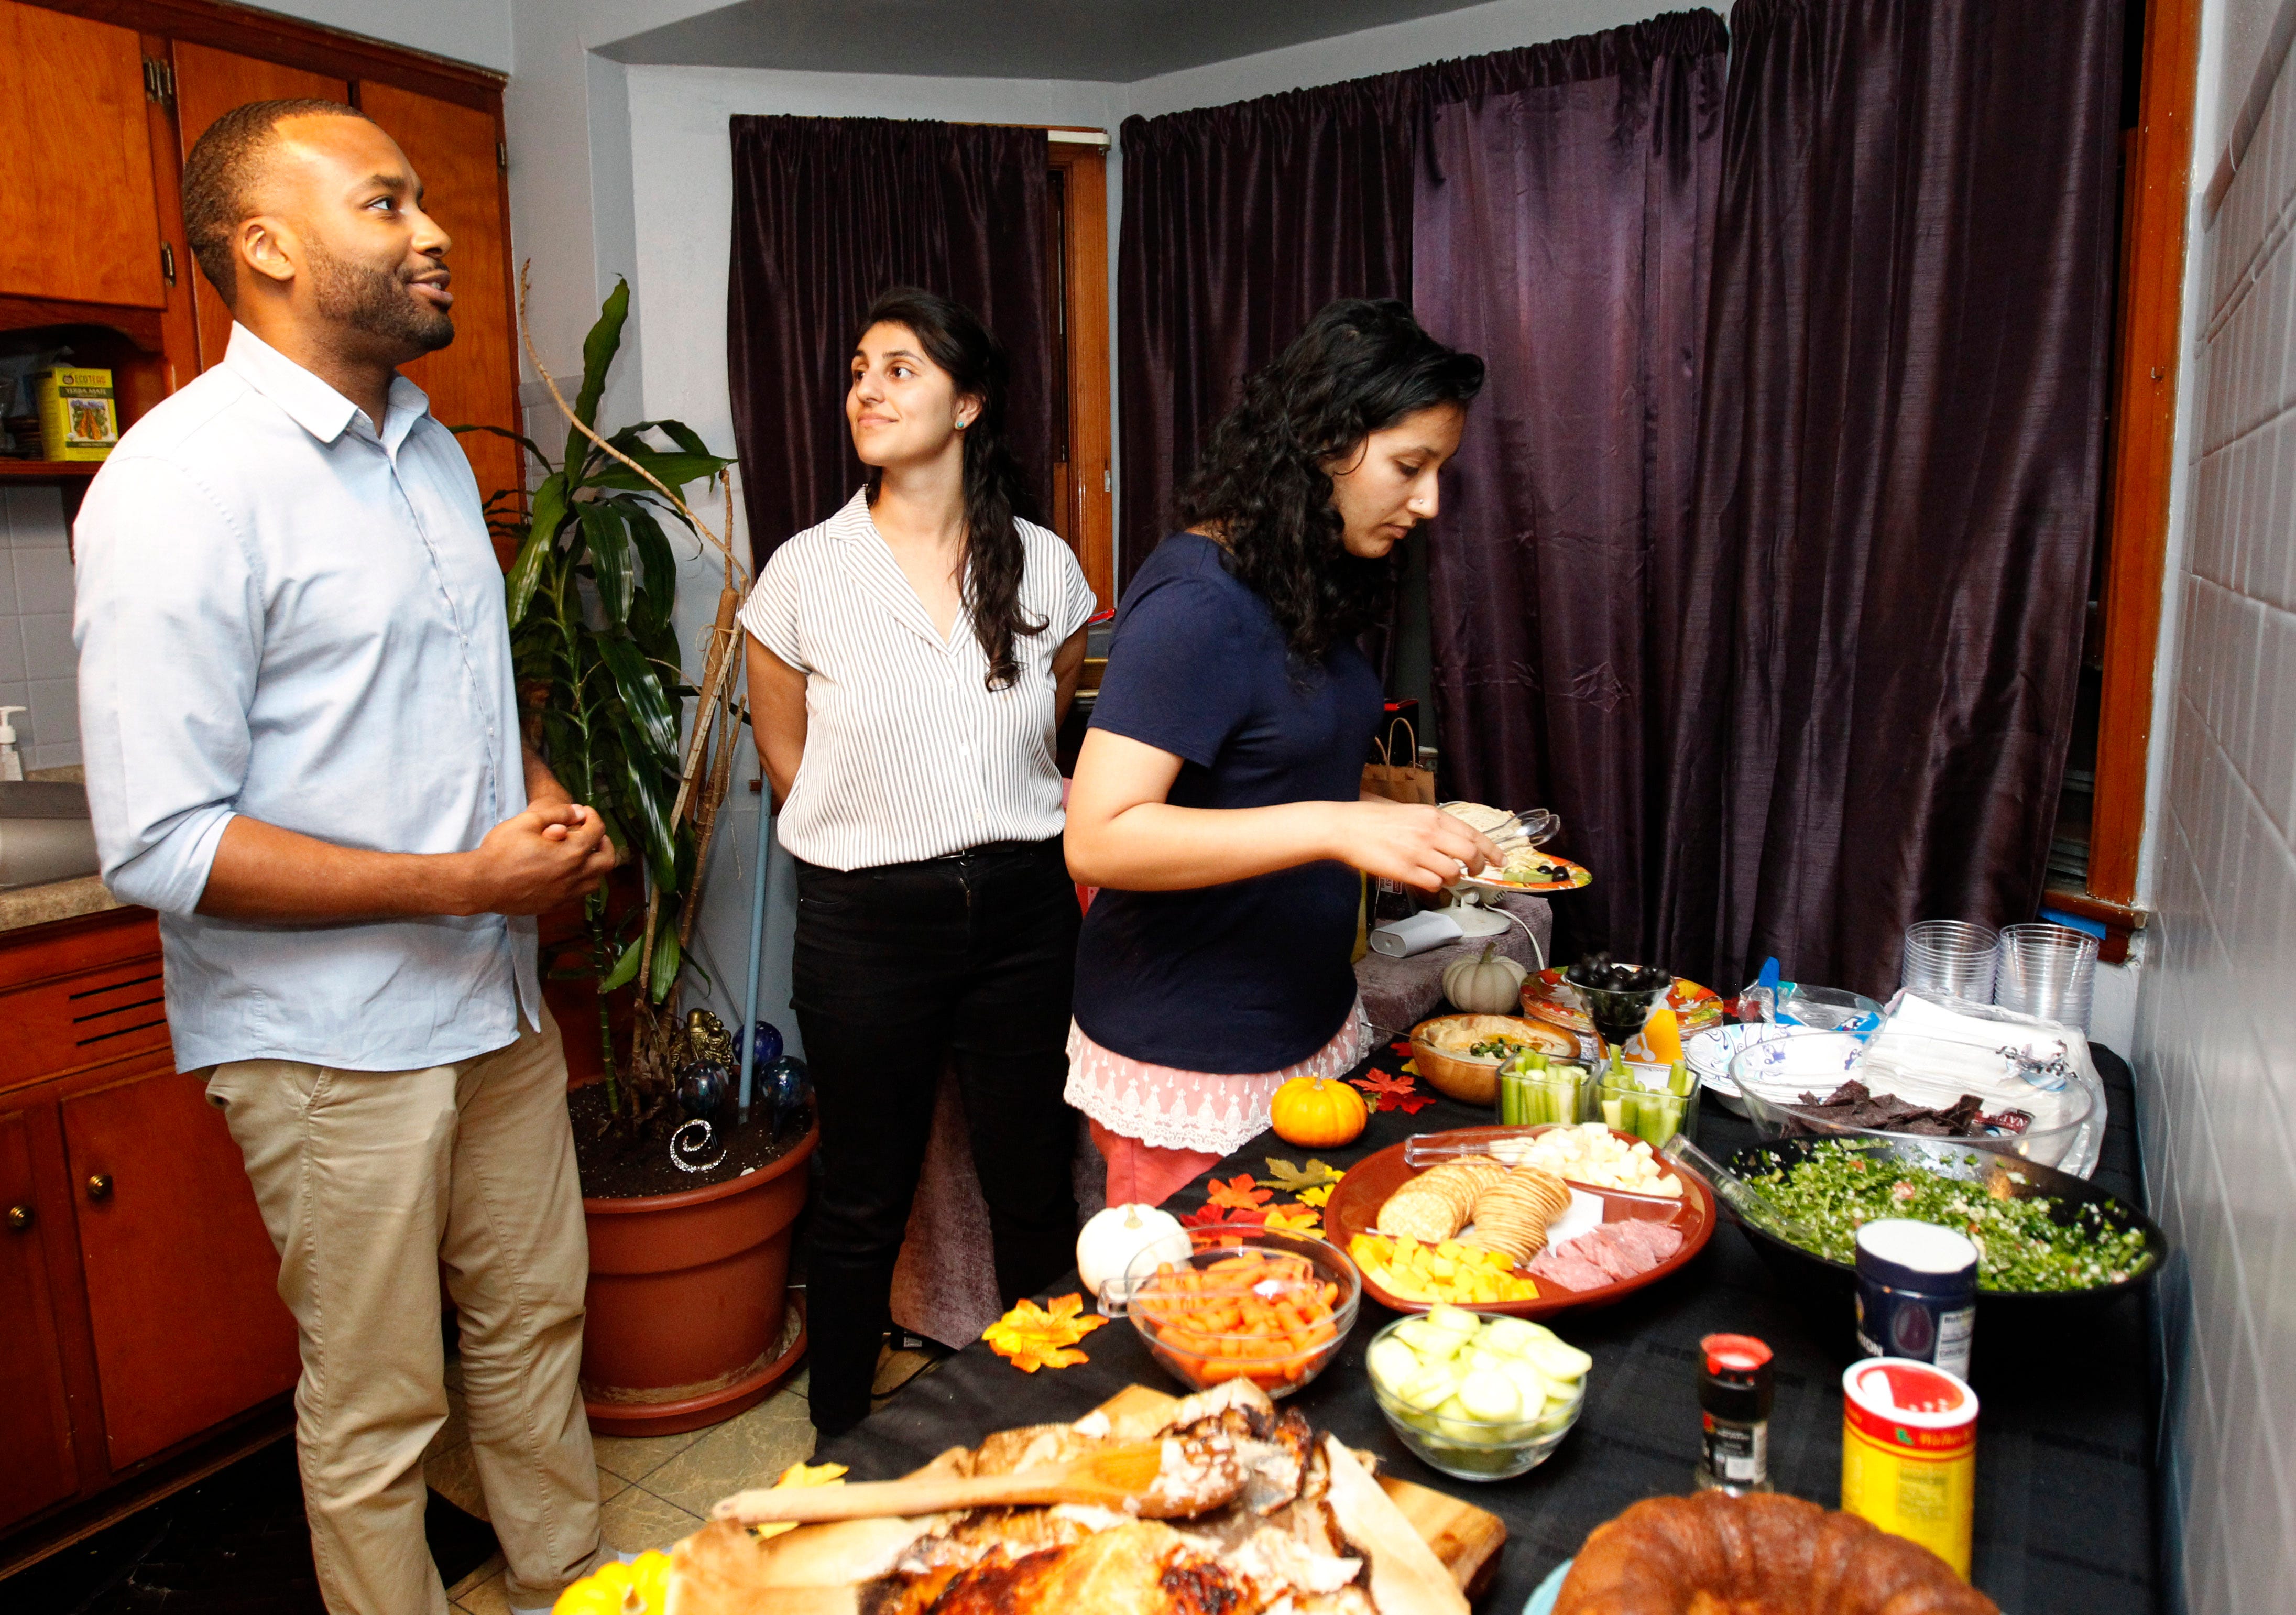 Earl Arms, from left, Minaliza Shahlapour and Priya Suri get dinner before joining others in discussions on race at an "On the Table MKE" event at the home of James E. Causey and his wife, Damia, in October 2019.